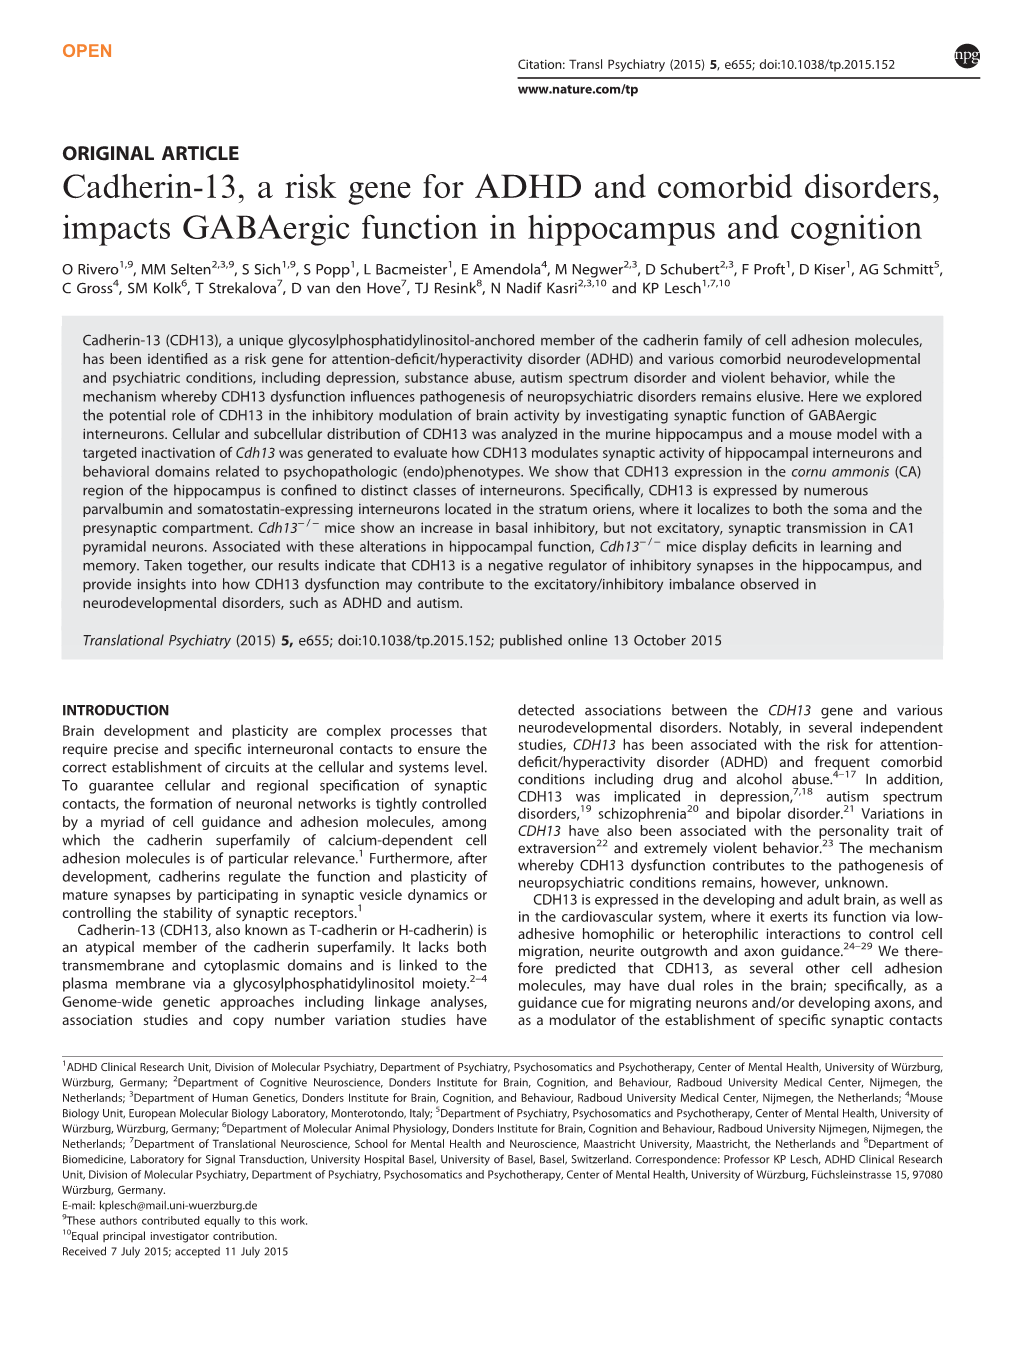 Cadherin-13, a Risk Gene for ADHD and Comorbid Disorders, Impacts Gabaergic Function in Hippocampus and Cognition